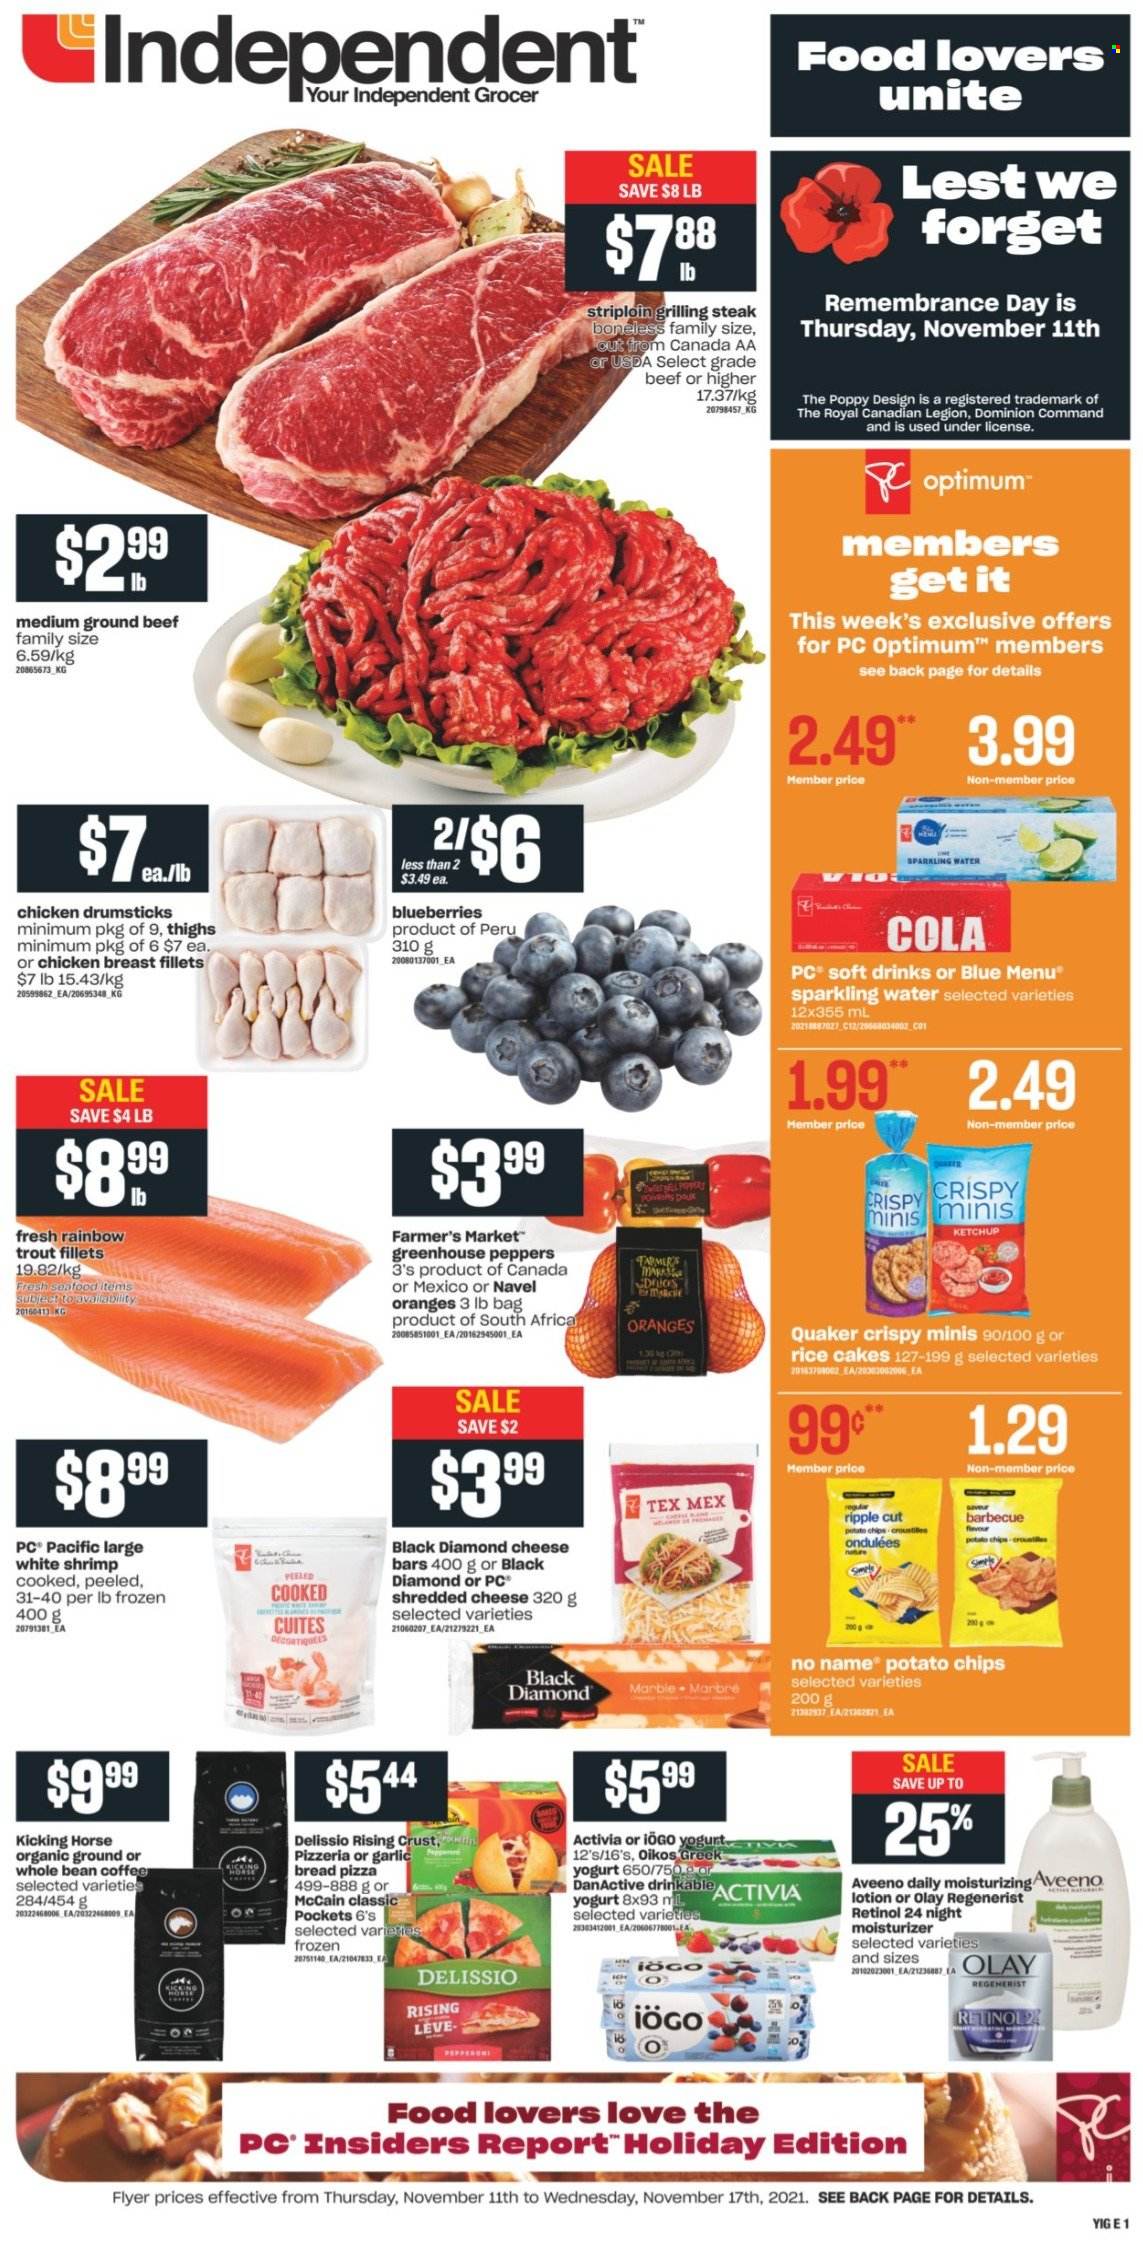 thumbnail - Independent Flyer - November 11, 2021 - November 17, 2021 - Sales products - bread, peppers, blueberries, navel oranges, trout, shrimps, No Name, pizza, Quaker, shredded cheese, greek yoghurt, yoghurt, Activia, Oikos, McCain, potato chips, soft drink, sparkling water, coffee, chicken breasts, chicken drumsticks, chicken, beef meat, ground beef, Aveeno, moisturizer, Olay, body lotion, Optimum, ketchup, steak, oranges. Page 1.